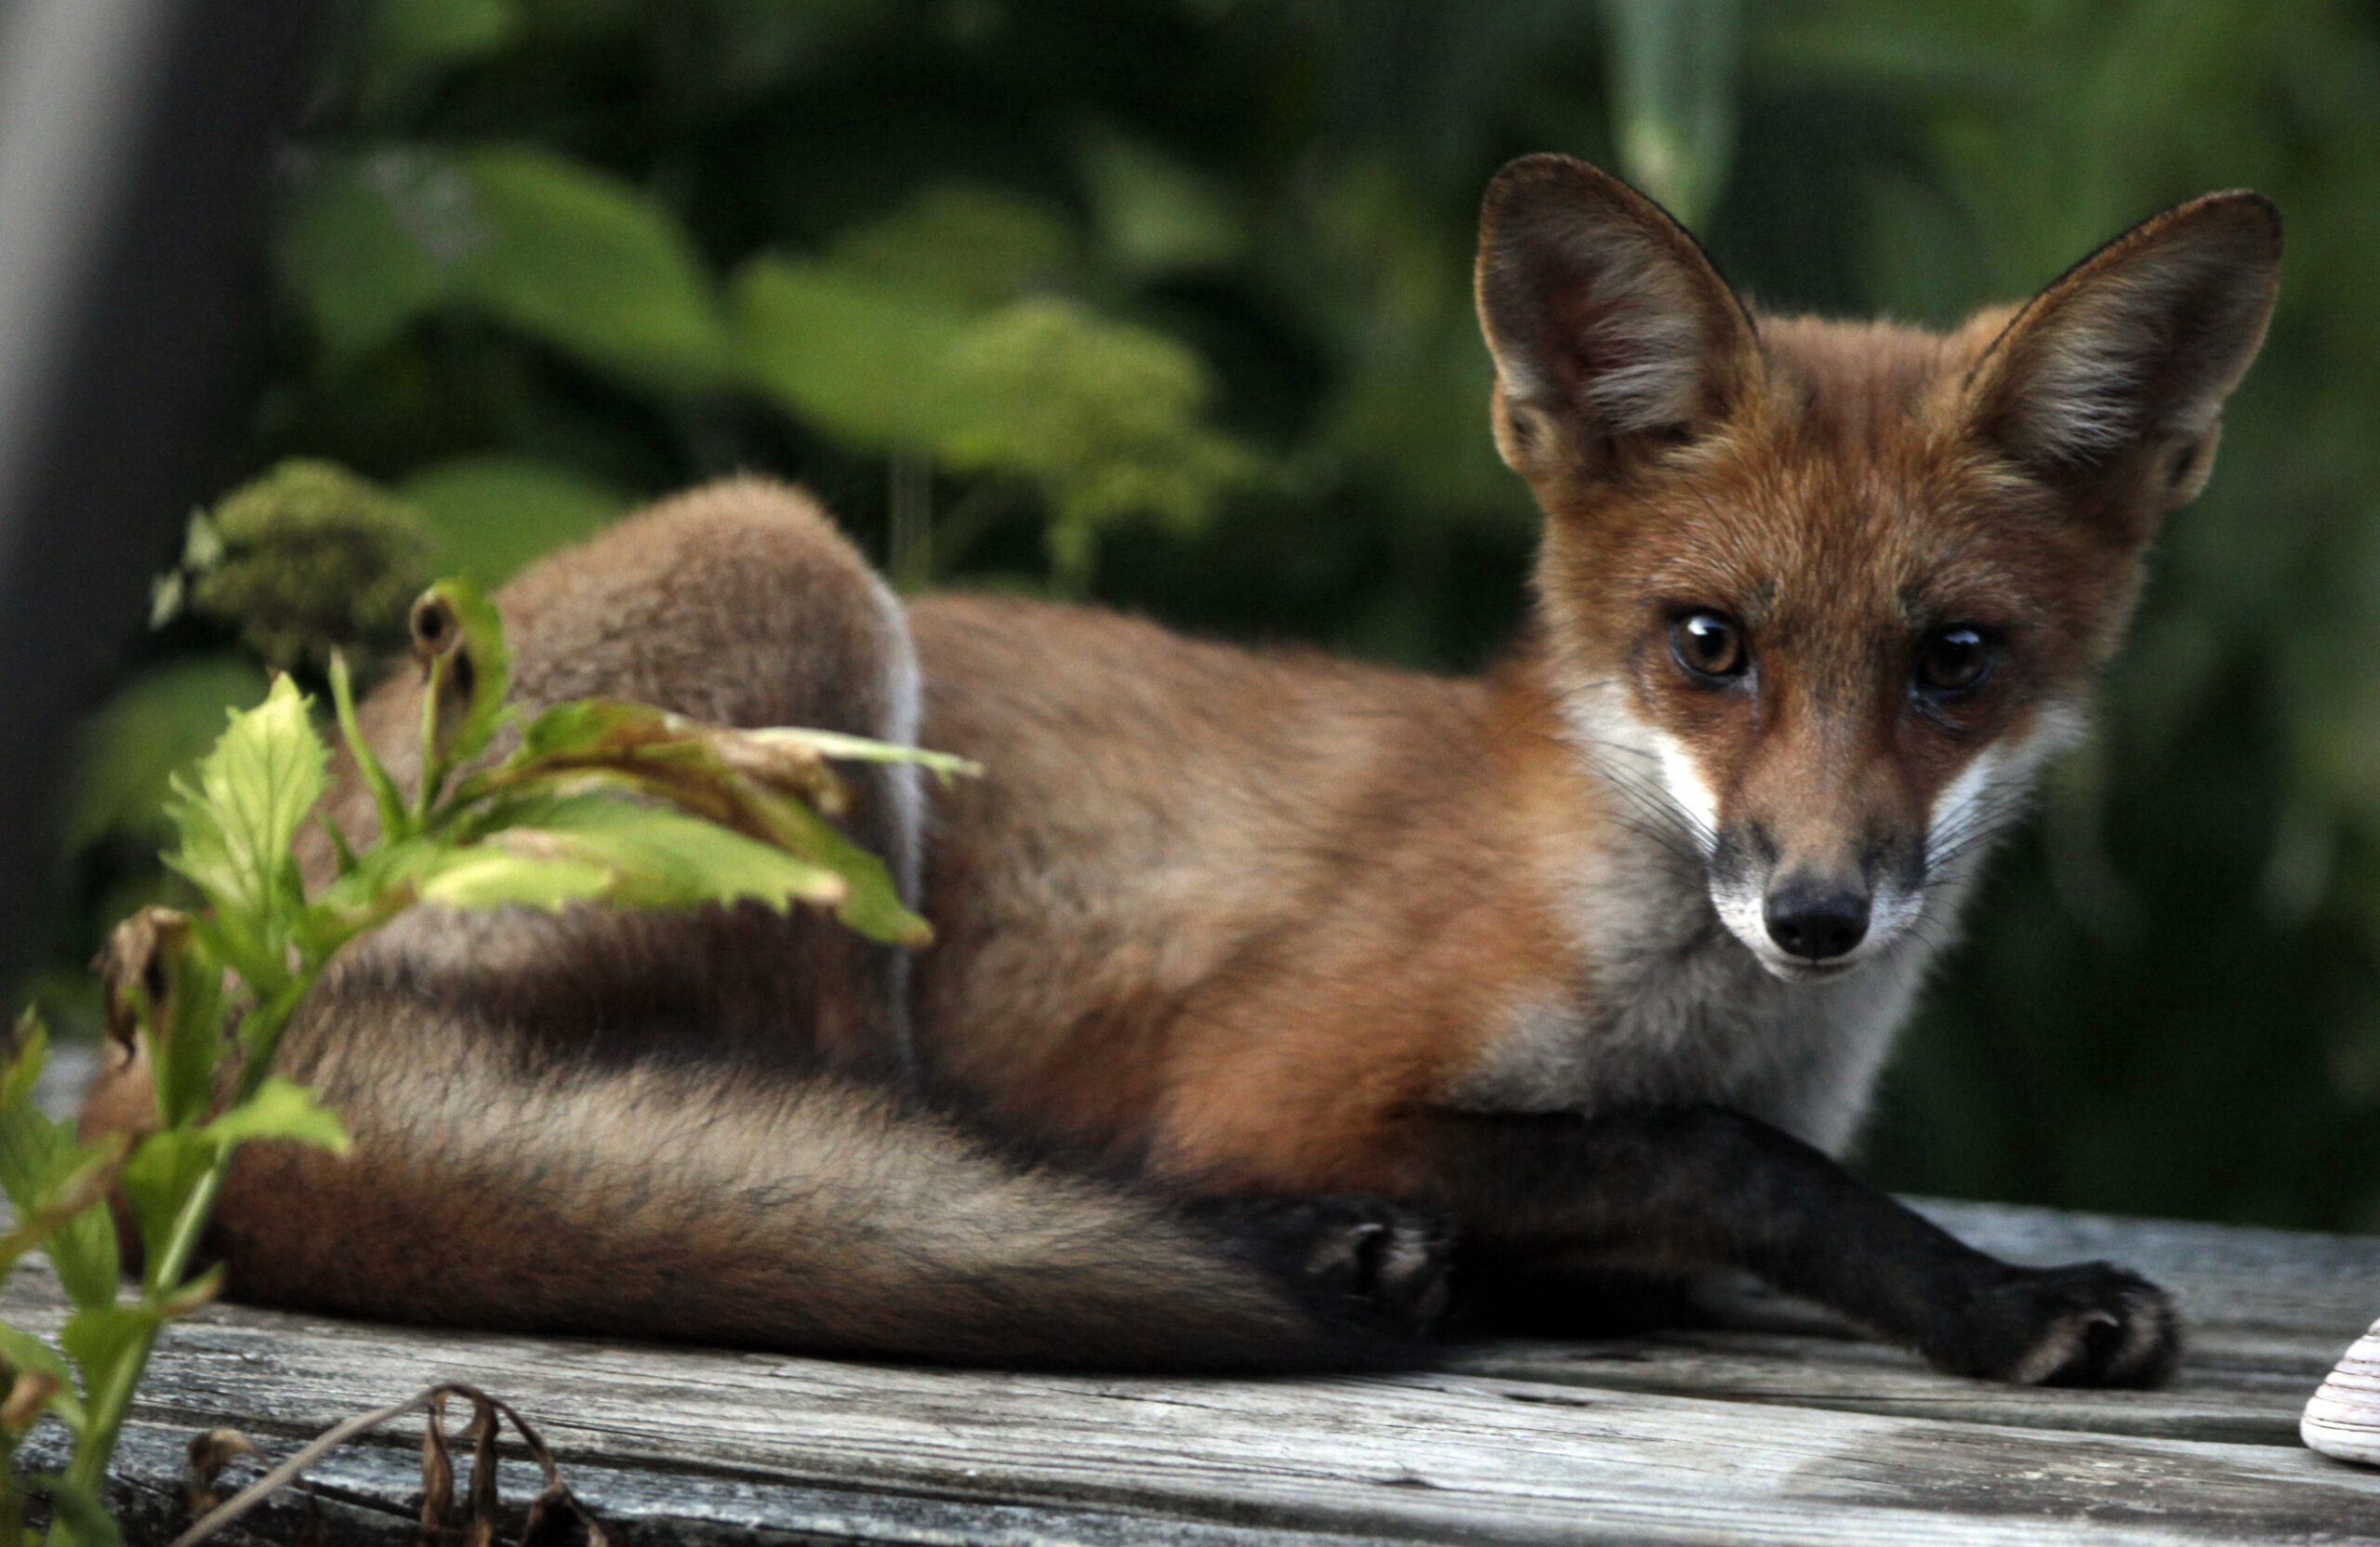 A red fox looks up from its resting place on a backyard deck